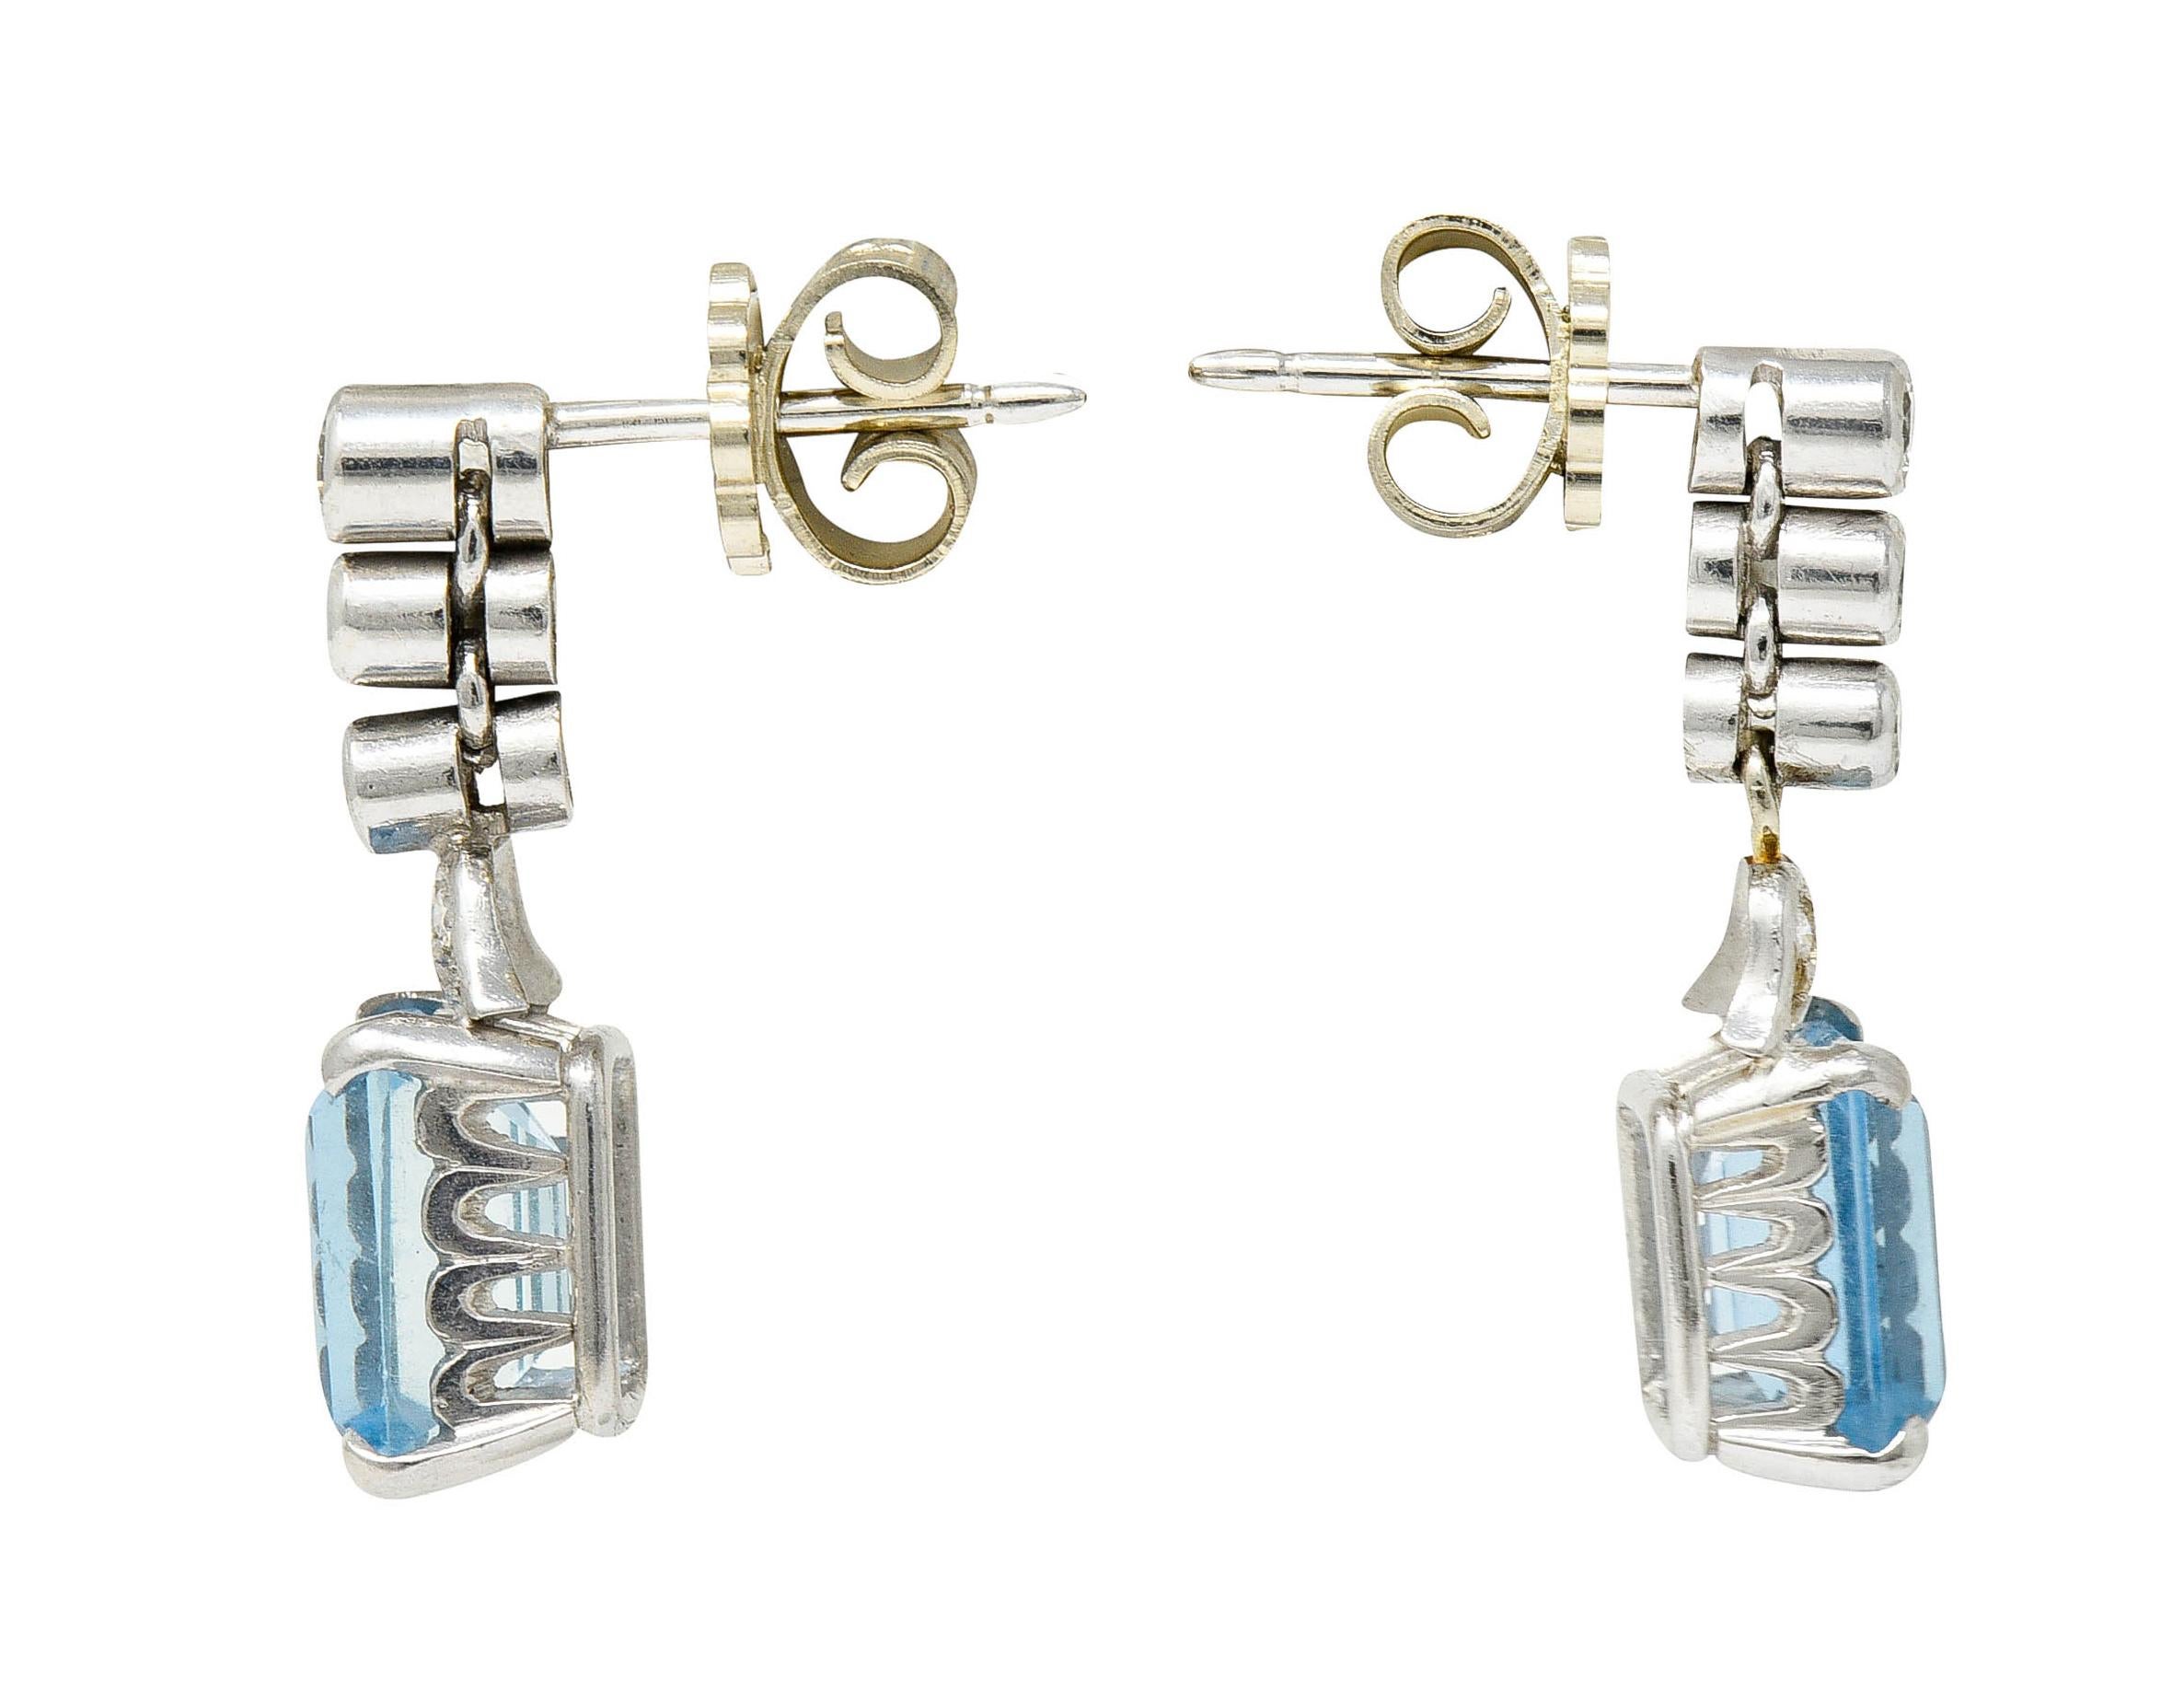 Drop earrings have stylized foliate surmounts comprised of articulated circular links

Accented by round brilliant cut diamonds weighing in total approximately 0.45 carat - G to J color with SI clarity

Features emerald cut aquamarines weighing in